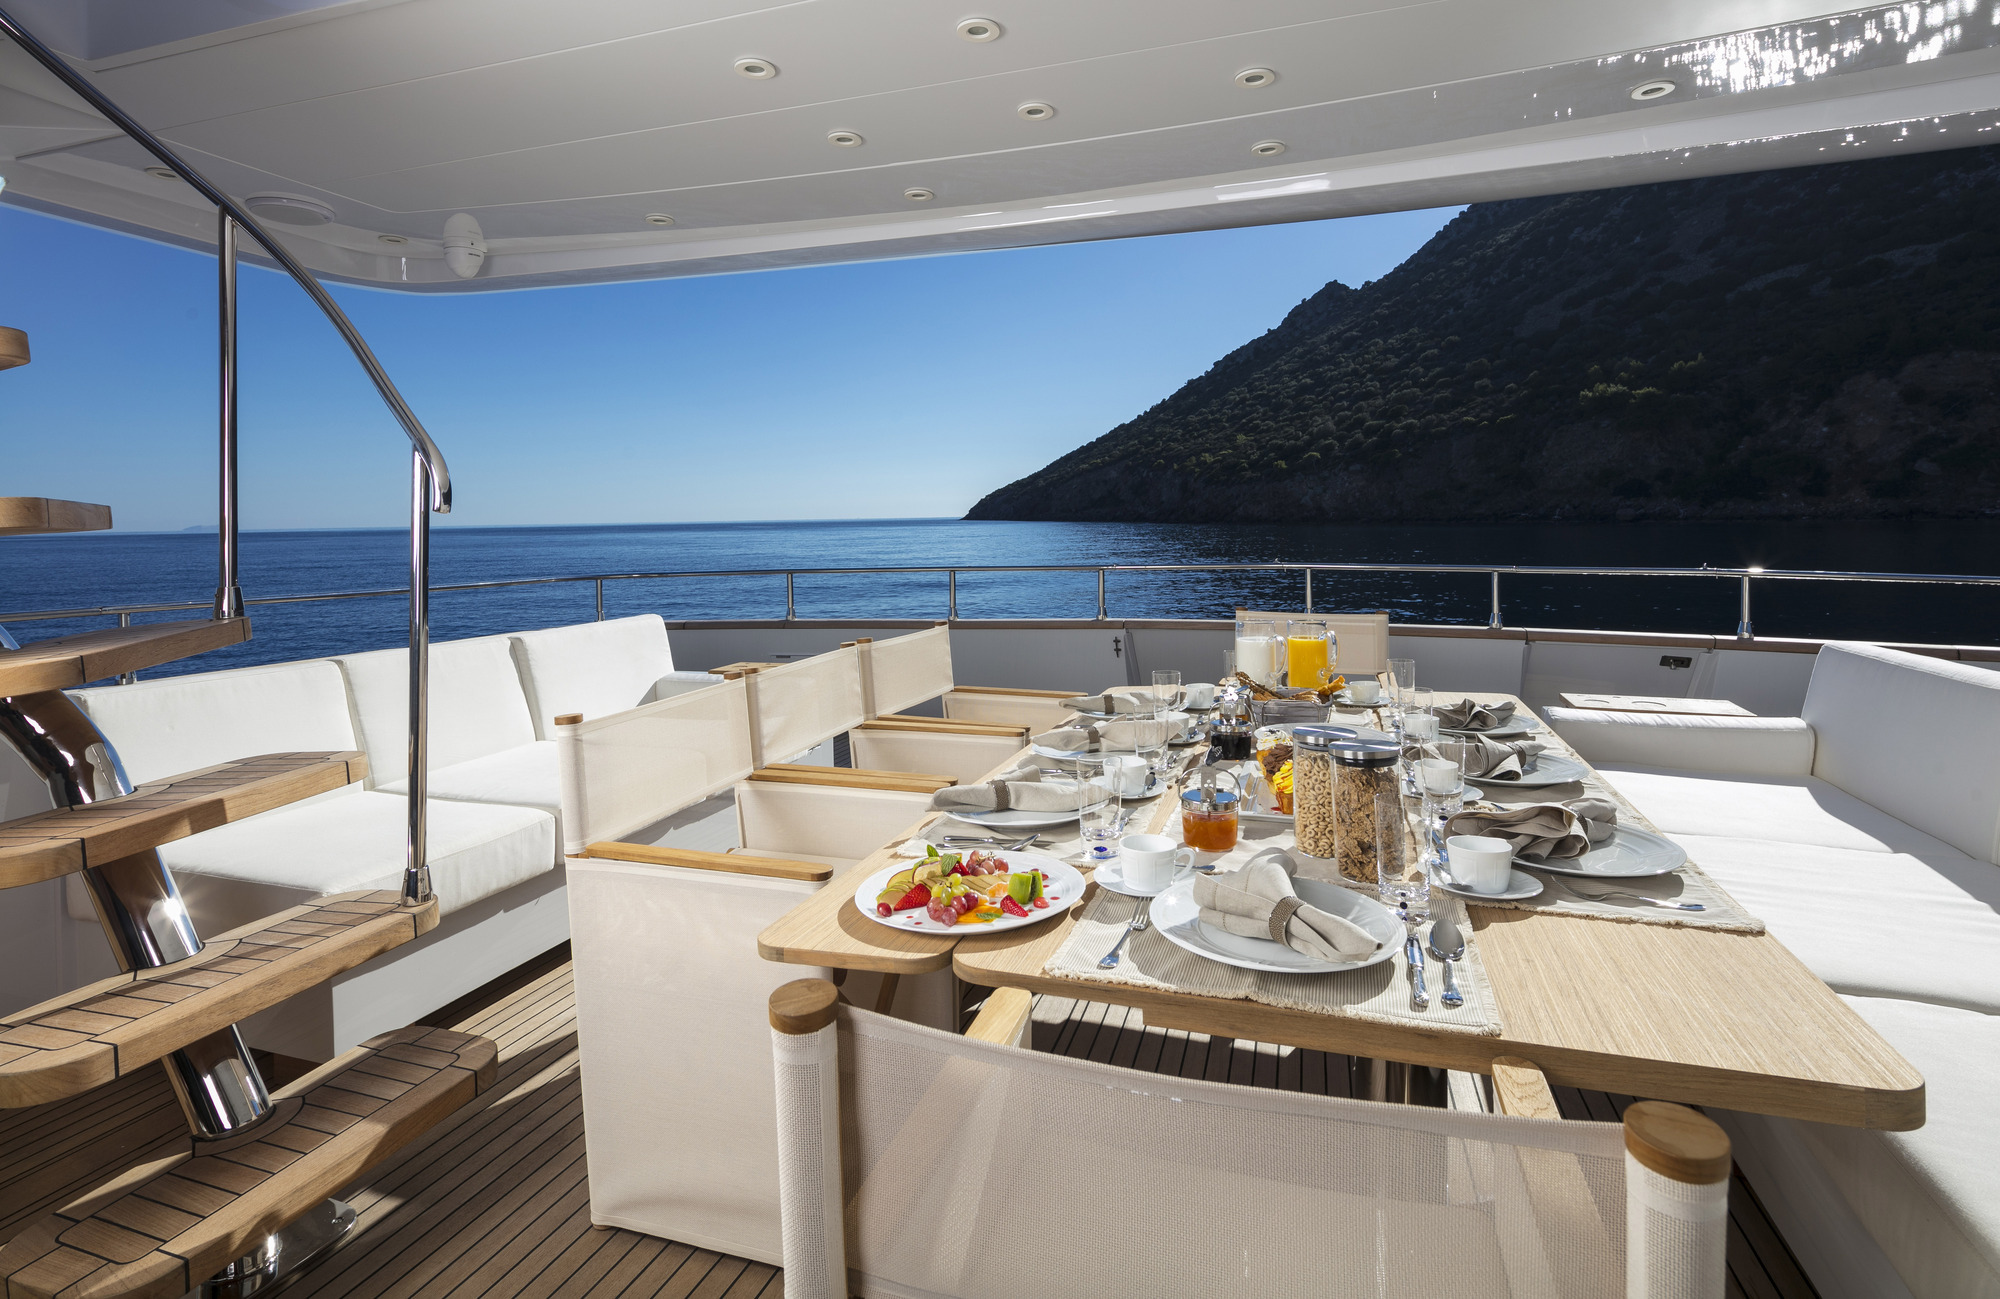 Breakfast on the aft deck